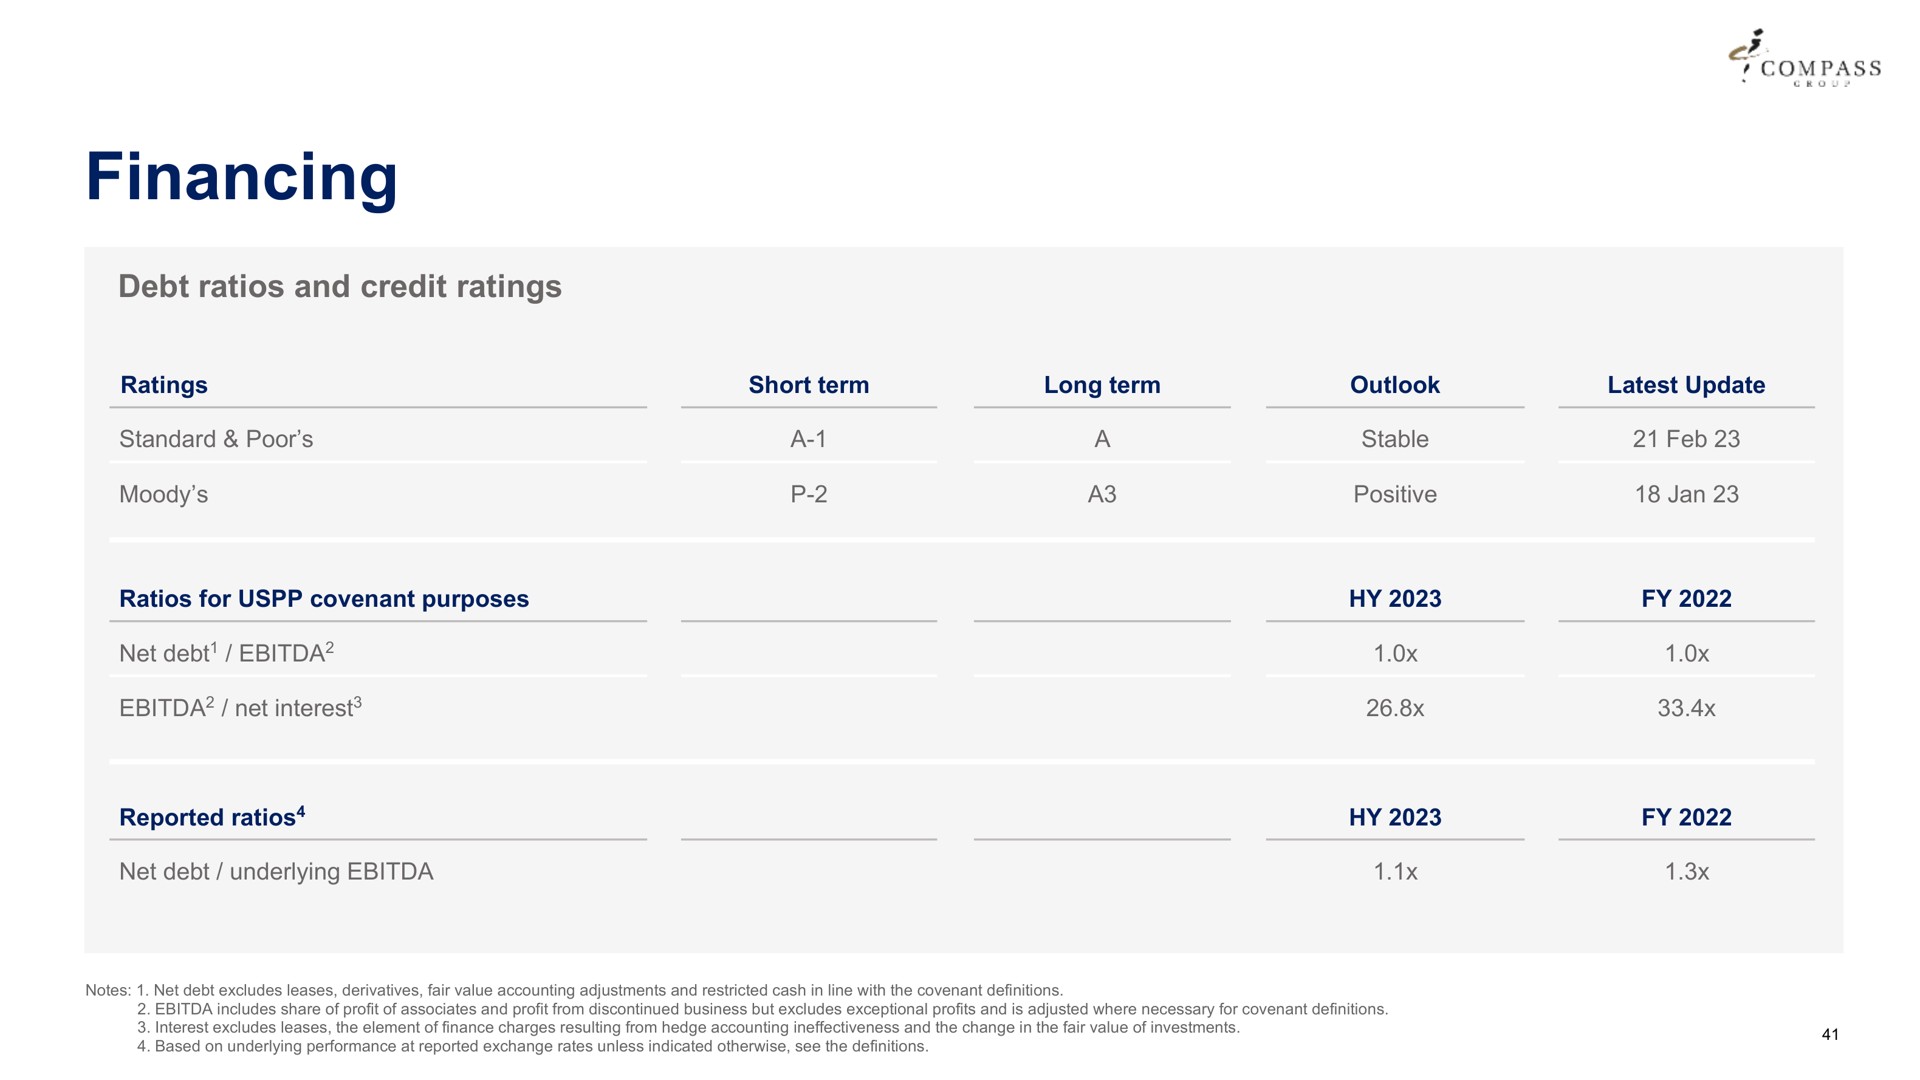 financing a compass debt ratios and credit ratings | Compass Group